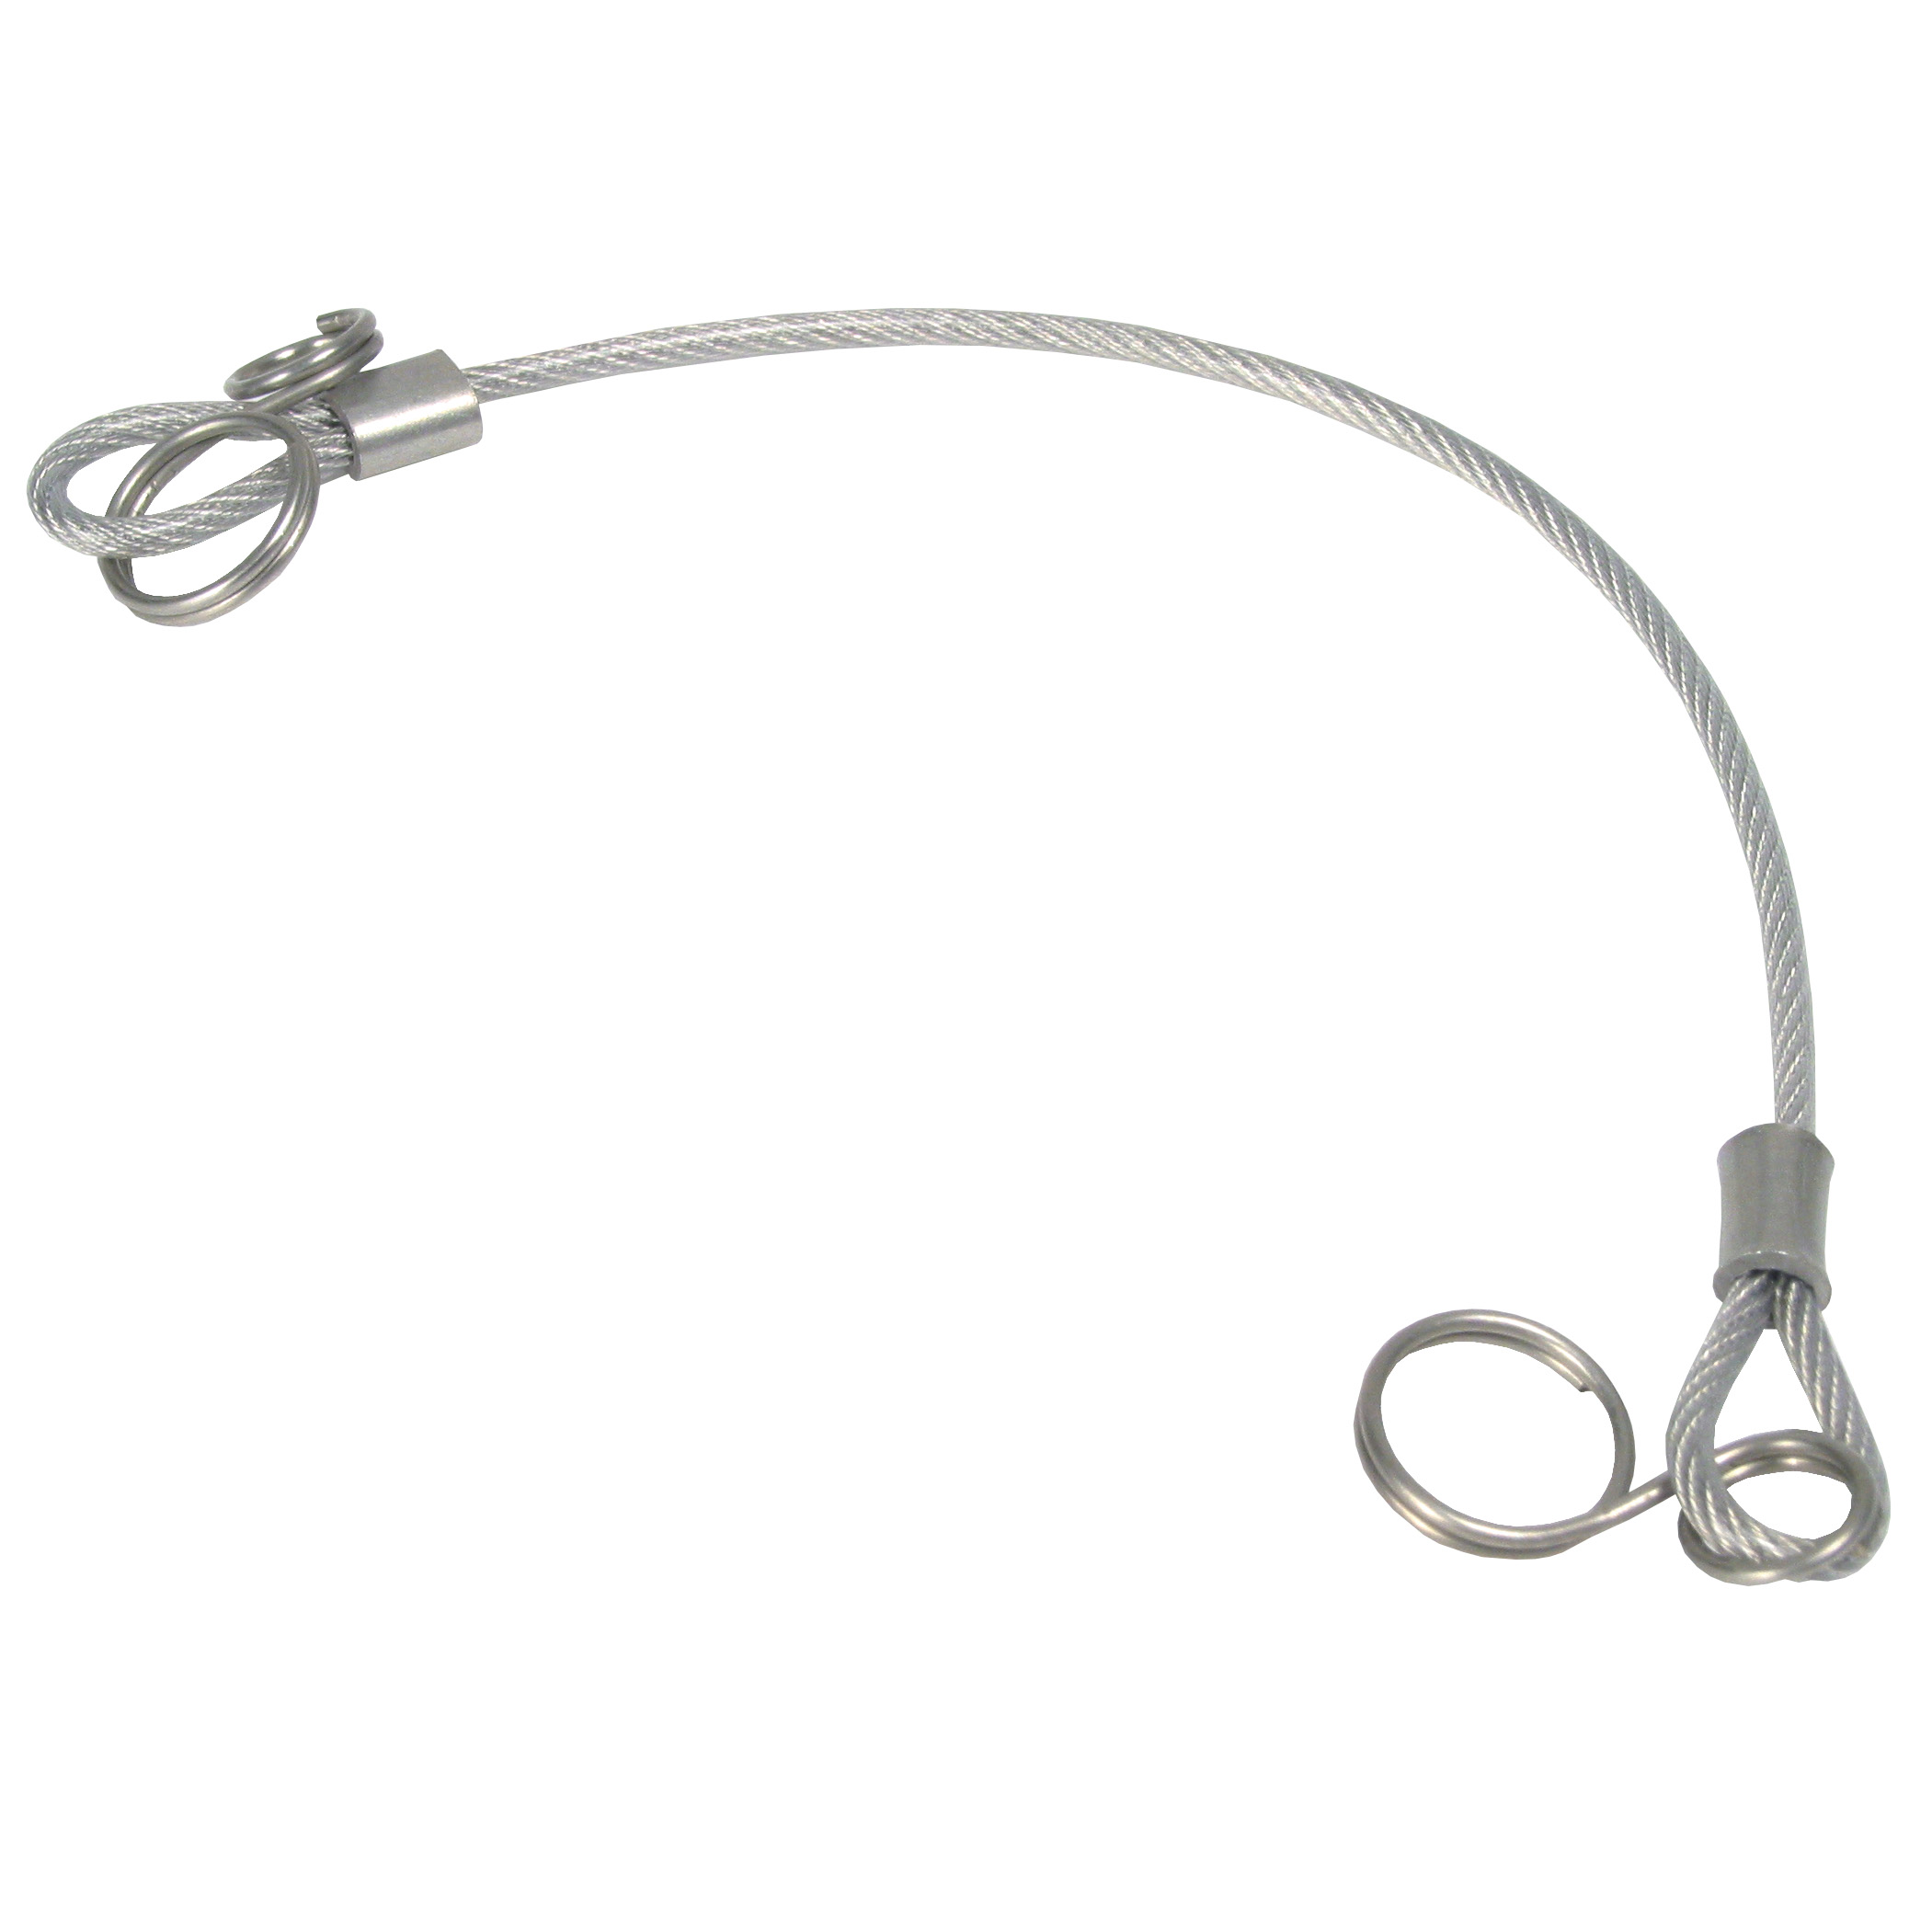 Retaining cable for ball pin - Retaining cable -  - 